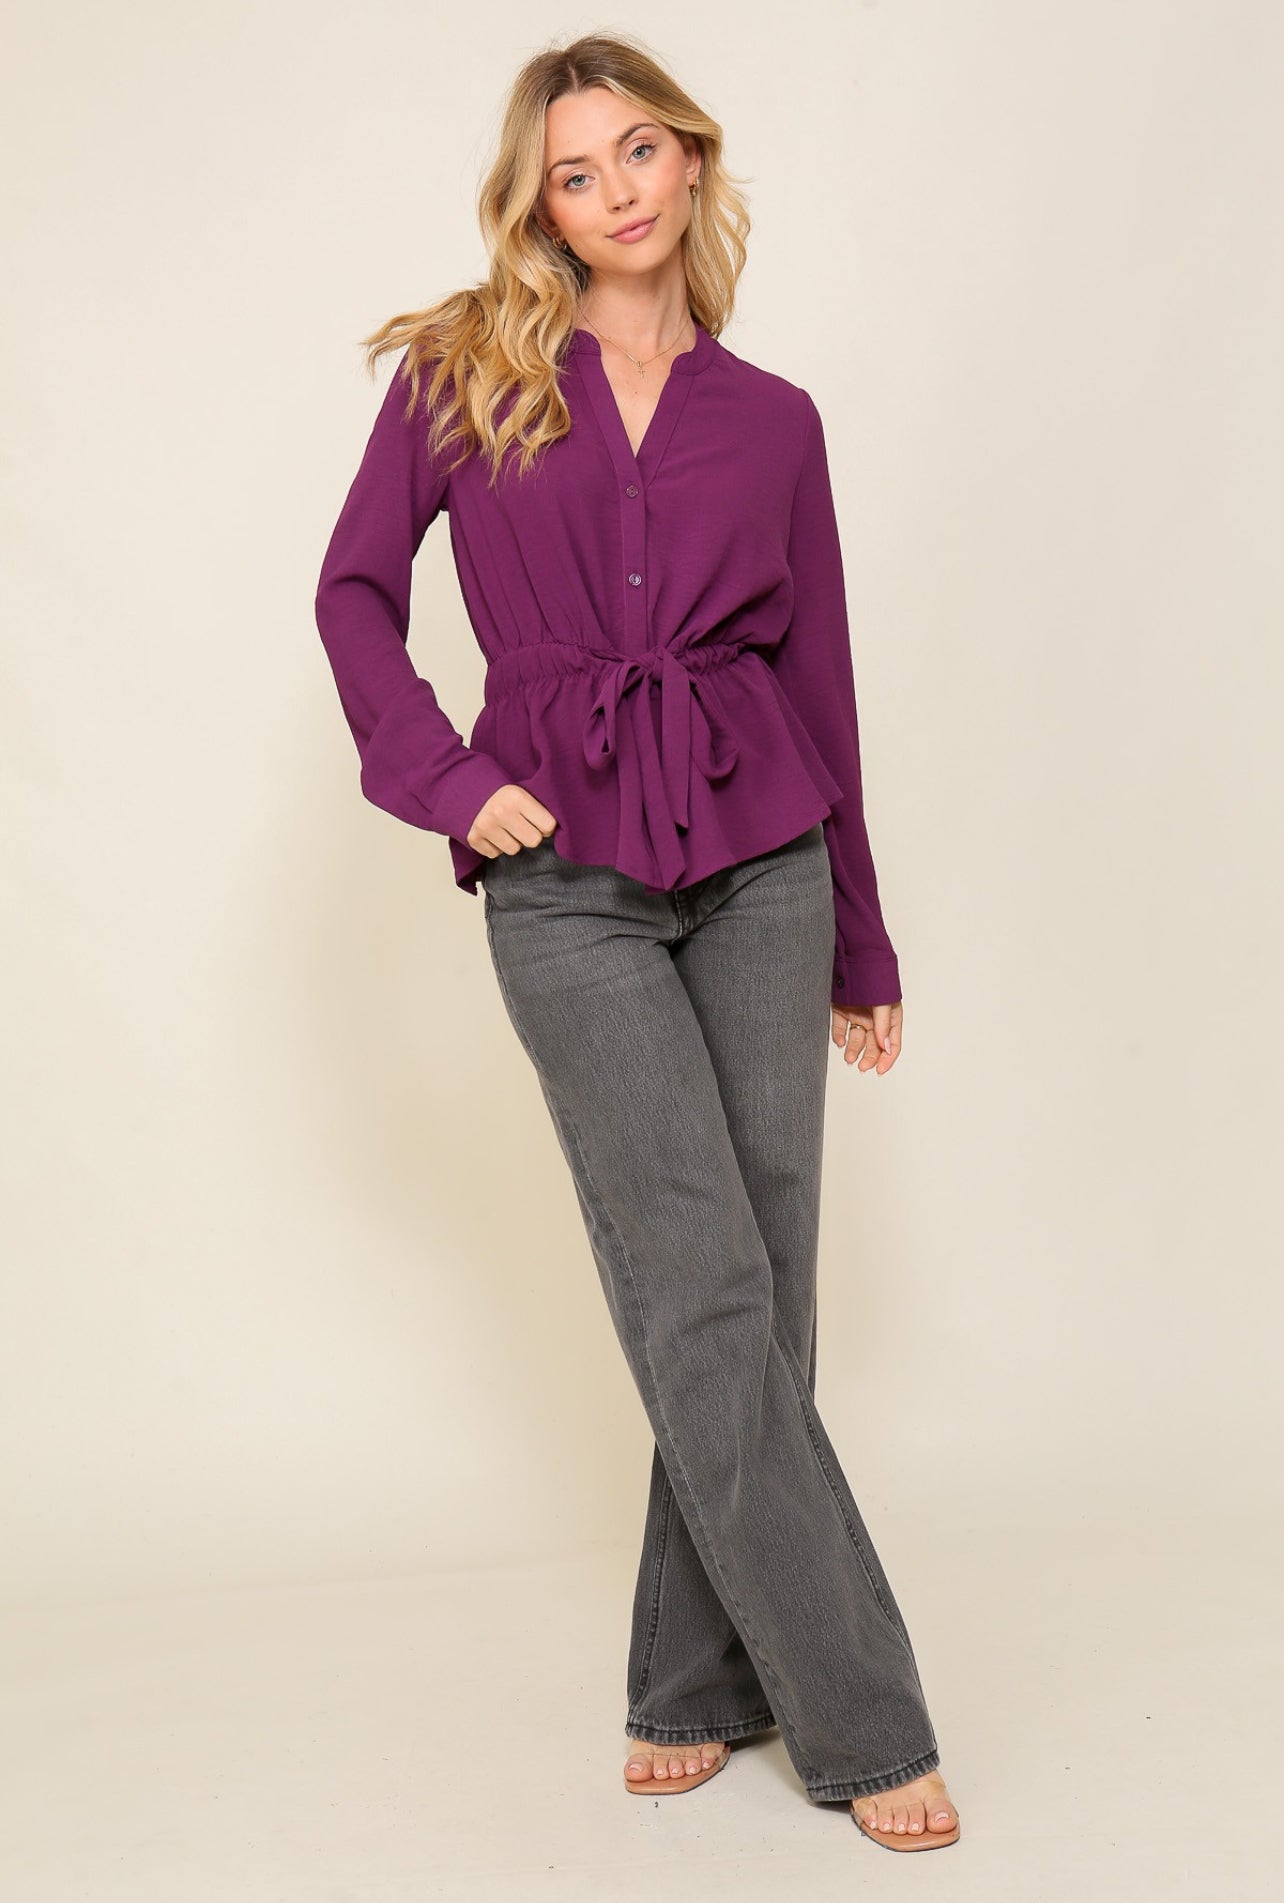 Look The Part Blouse In Purple